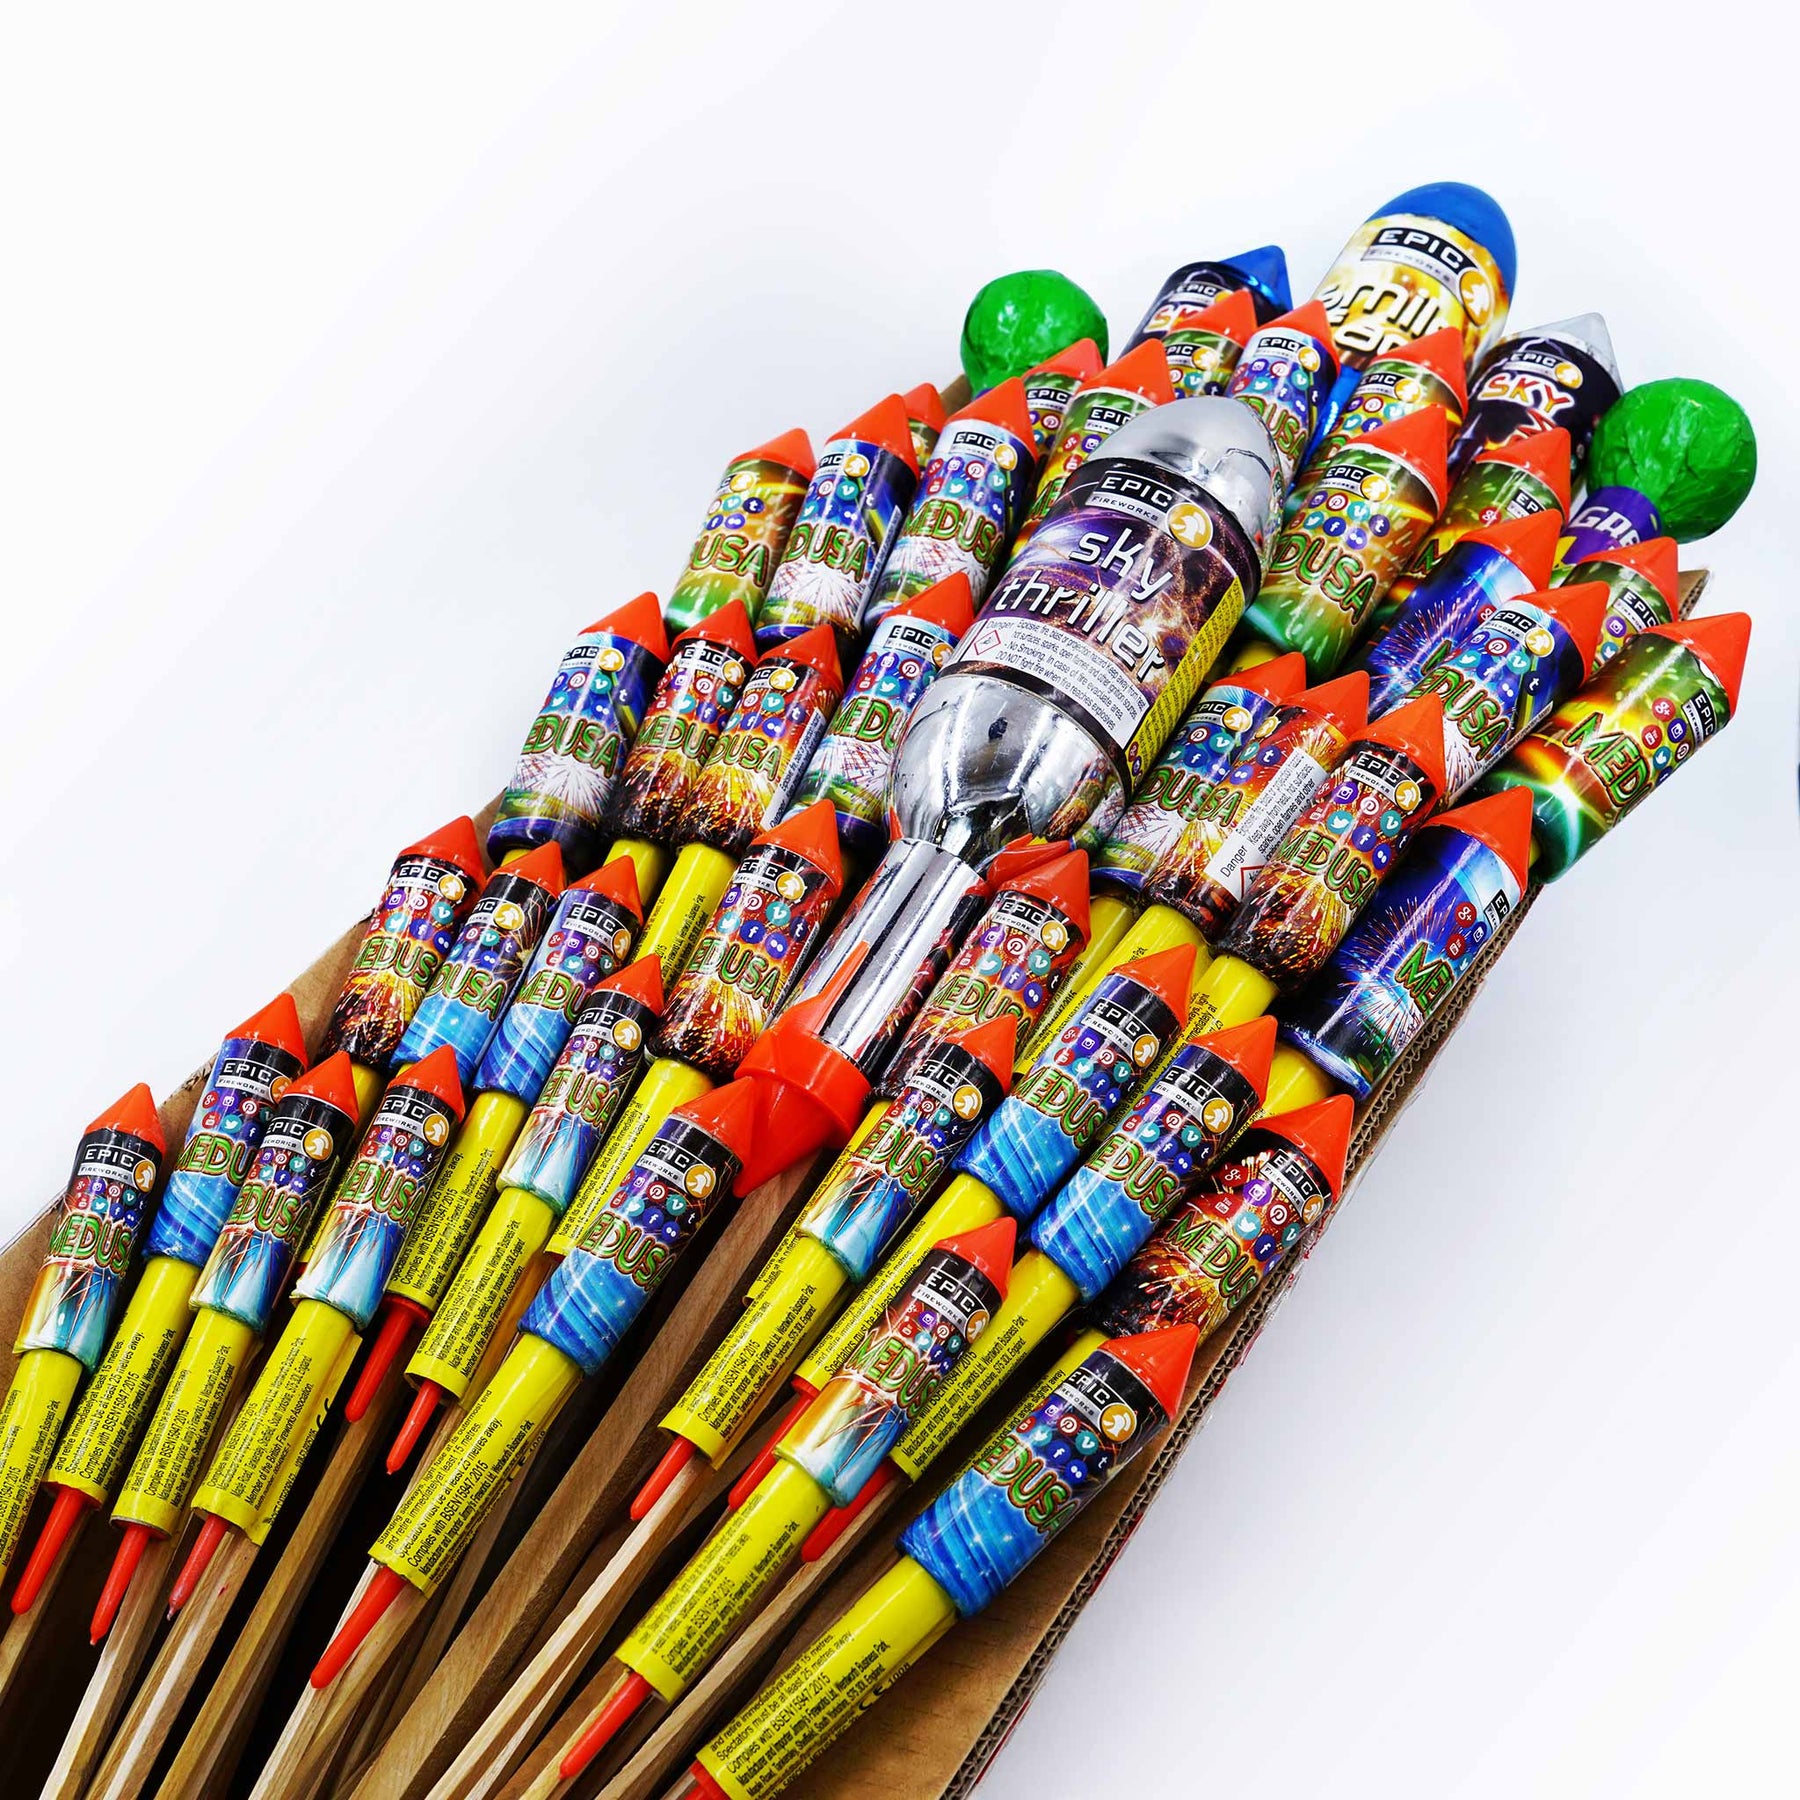 Are you really bothered about the shape of a firework rocket?